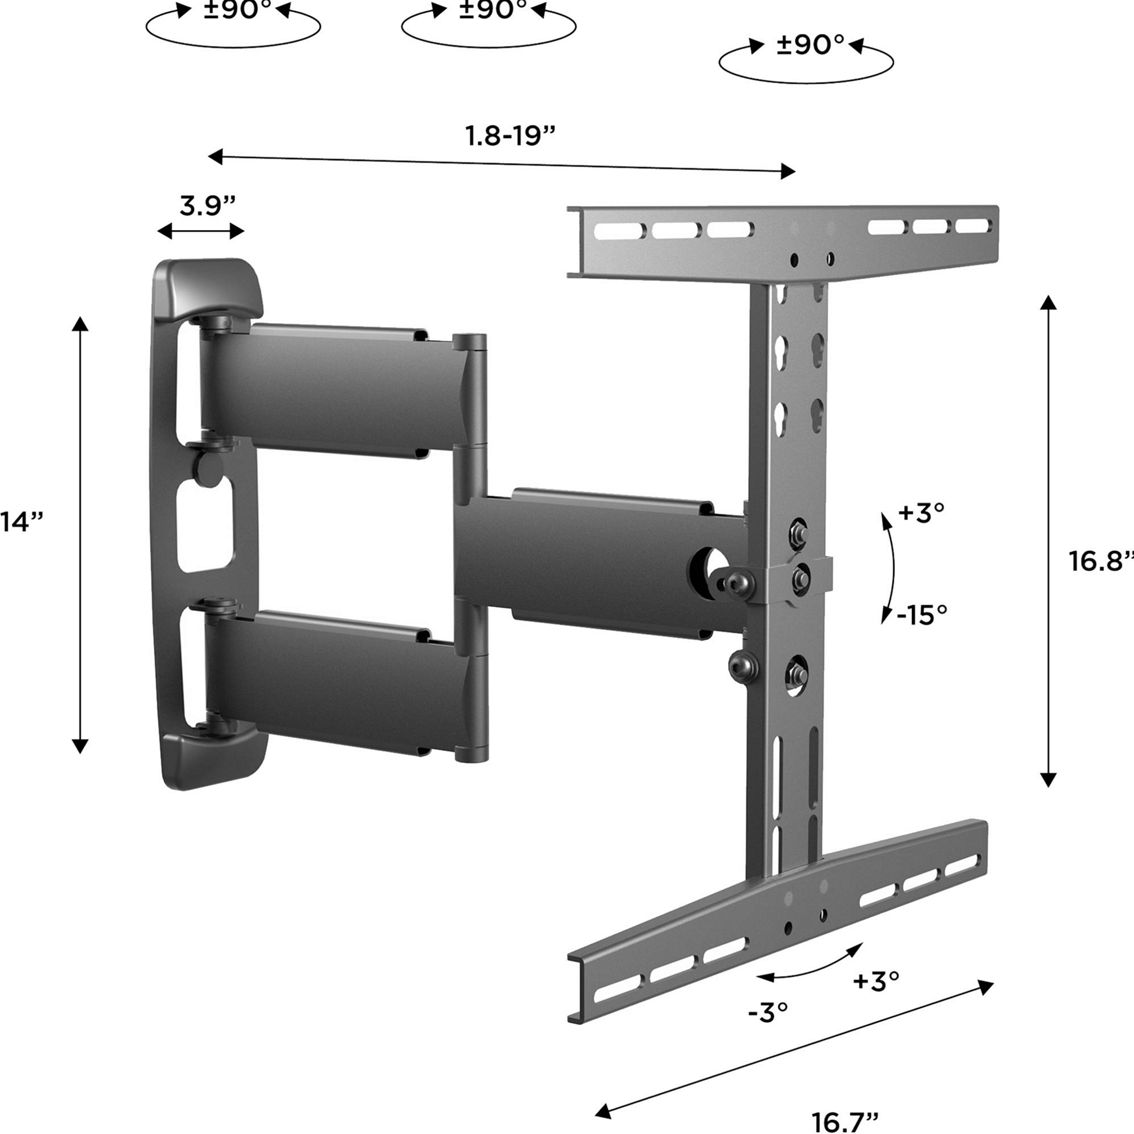 Promounts Articulating Wall Mount for 32 in. to 60 in. Screens Holds up to 80 lb. - Image 7 of 7